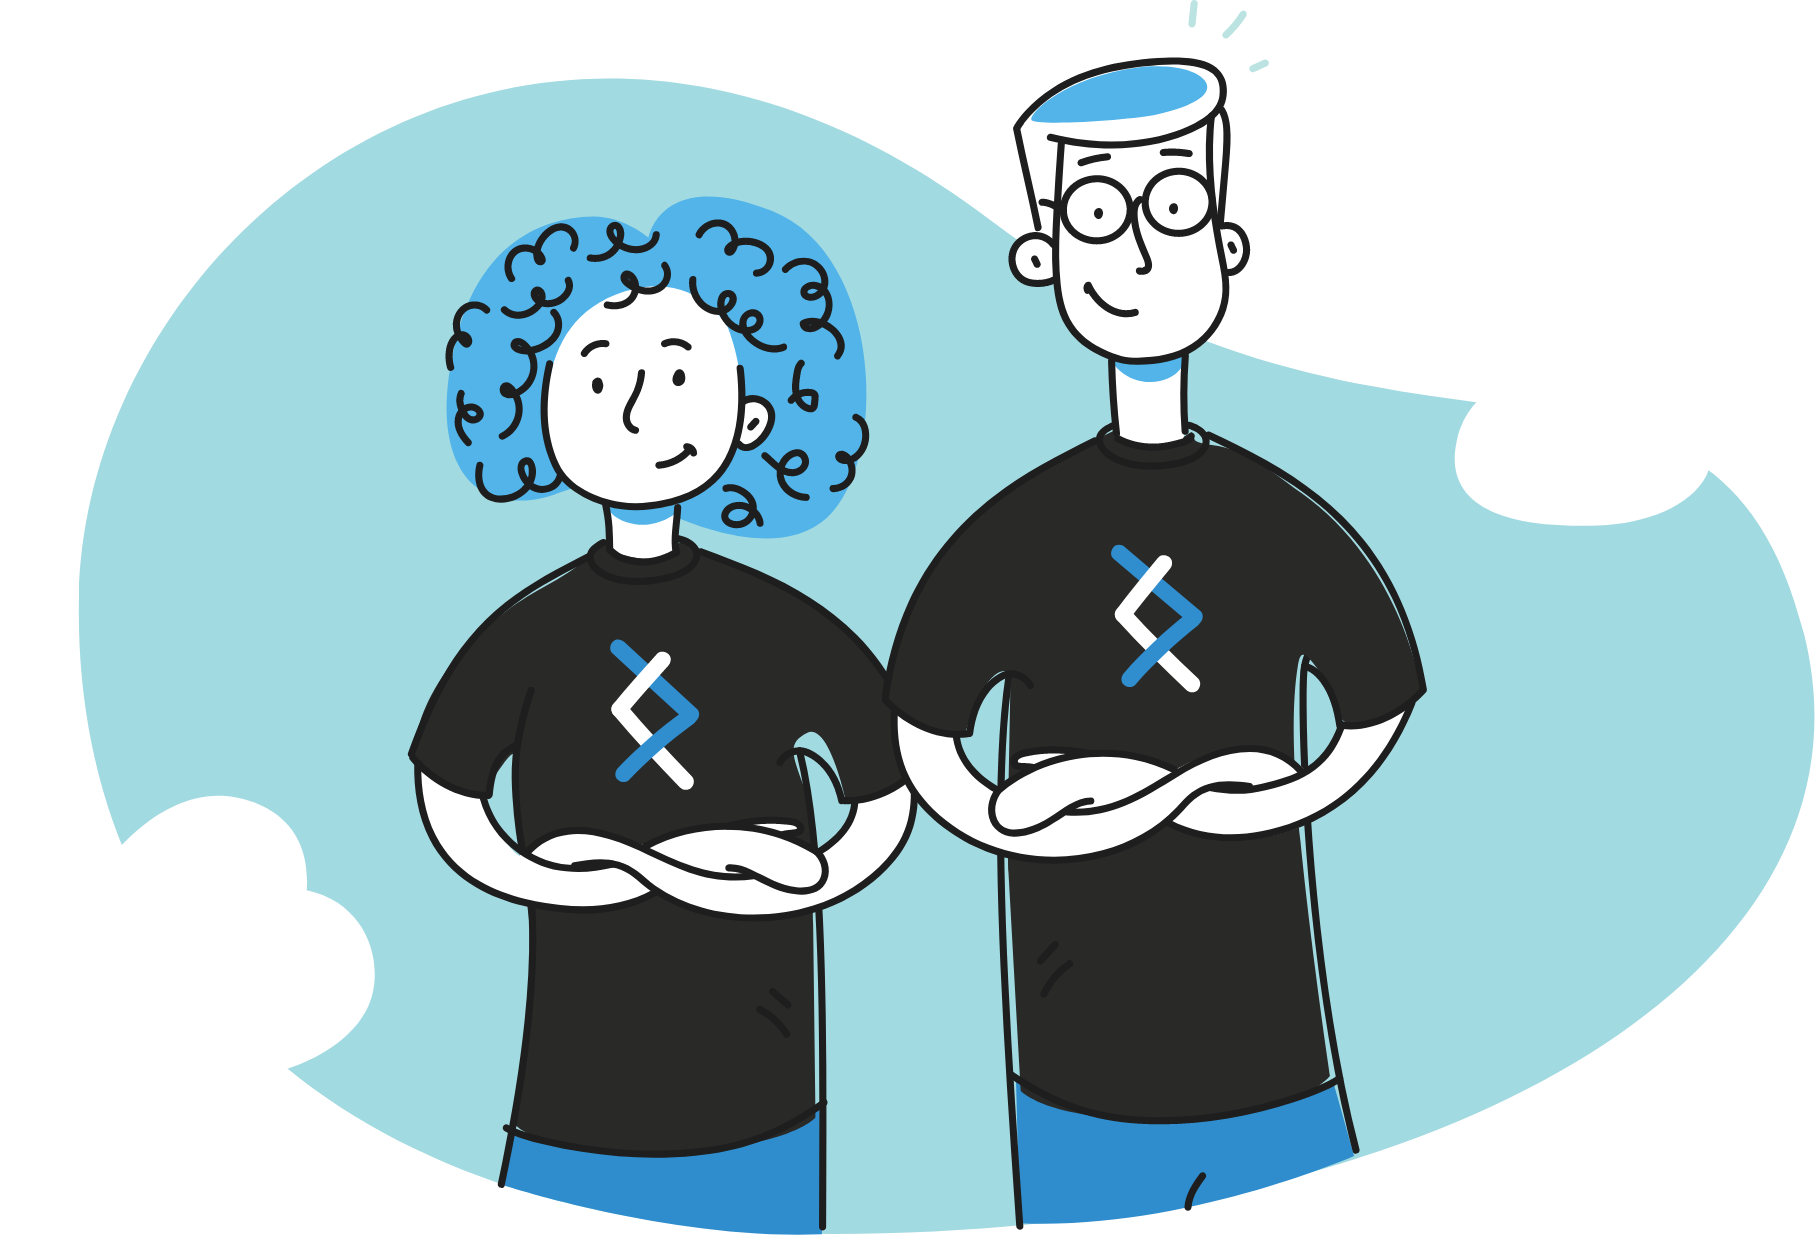 illustration of two dnx characters crossing their arms